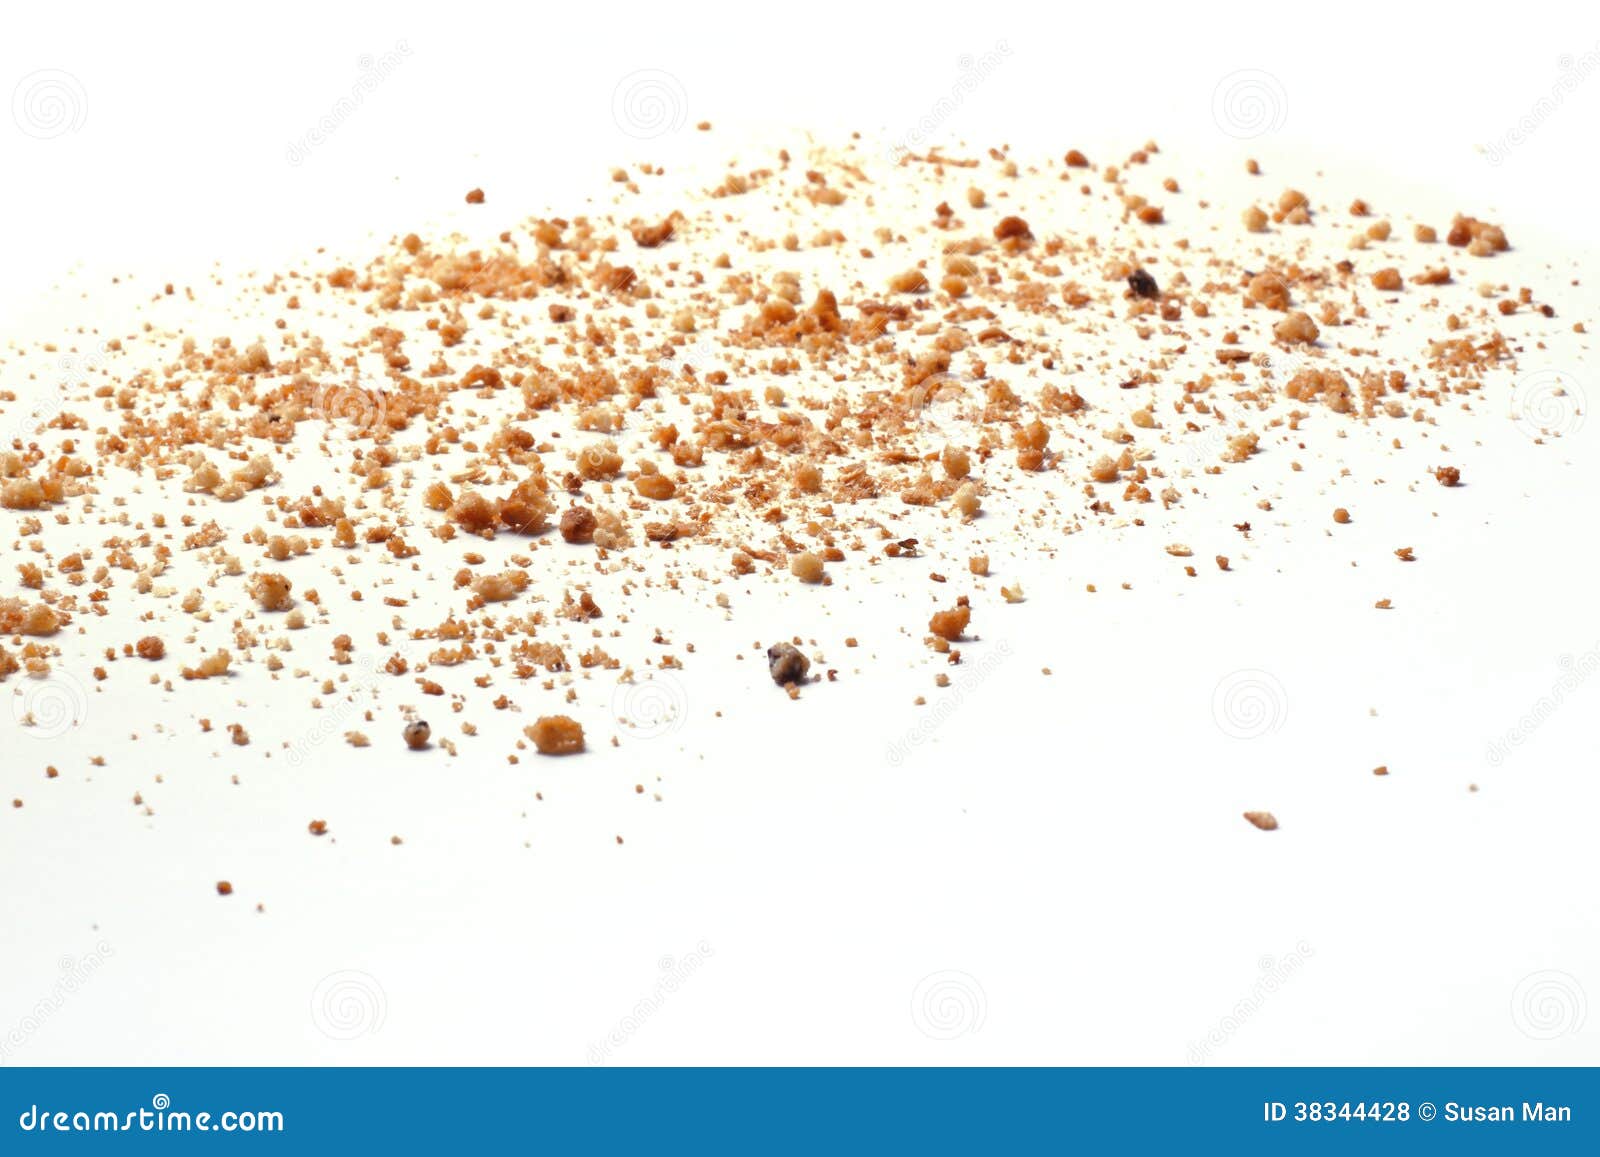 crumbs on white background - wide view